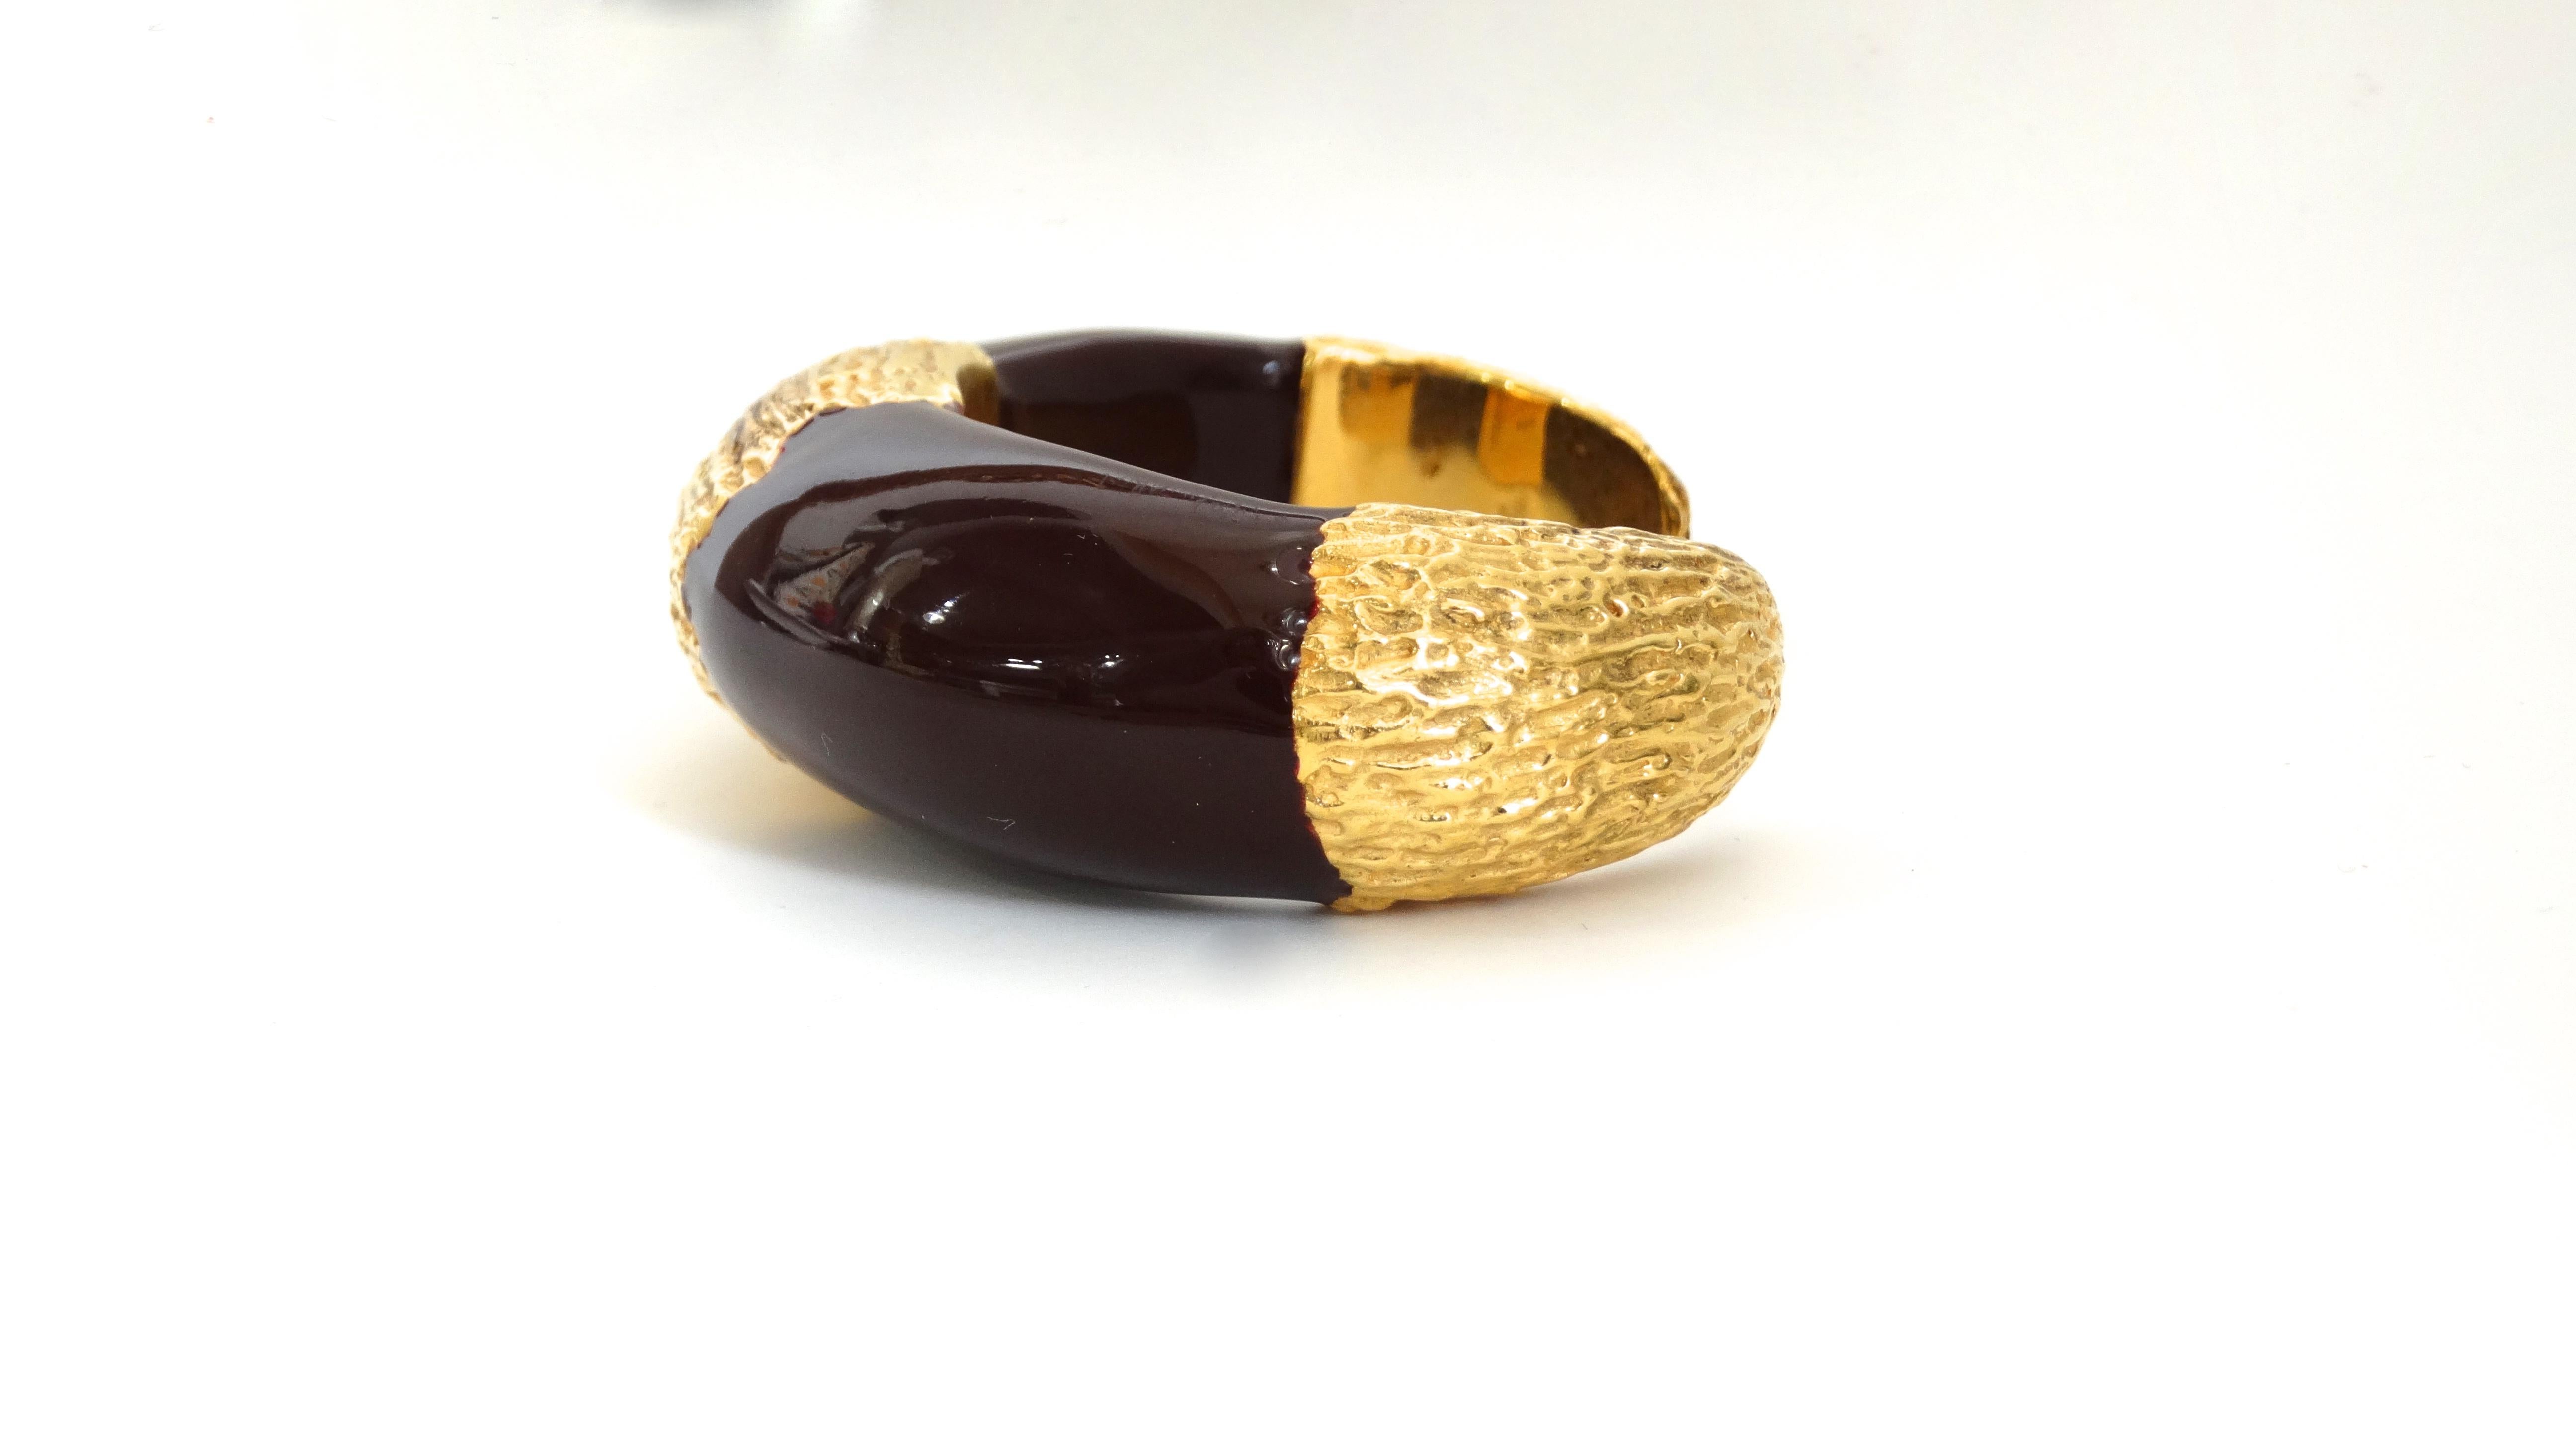 Spice up your bracelet game with this Roberto Cavalli cuff! Circa 1990s to early 2000s, this cuff is crafted from ceramic and finished in a deep burgundy color. Includes gold plated textured metal at the center and both ends. Perfect to put on with